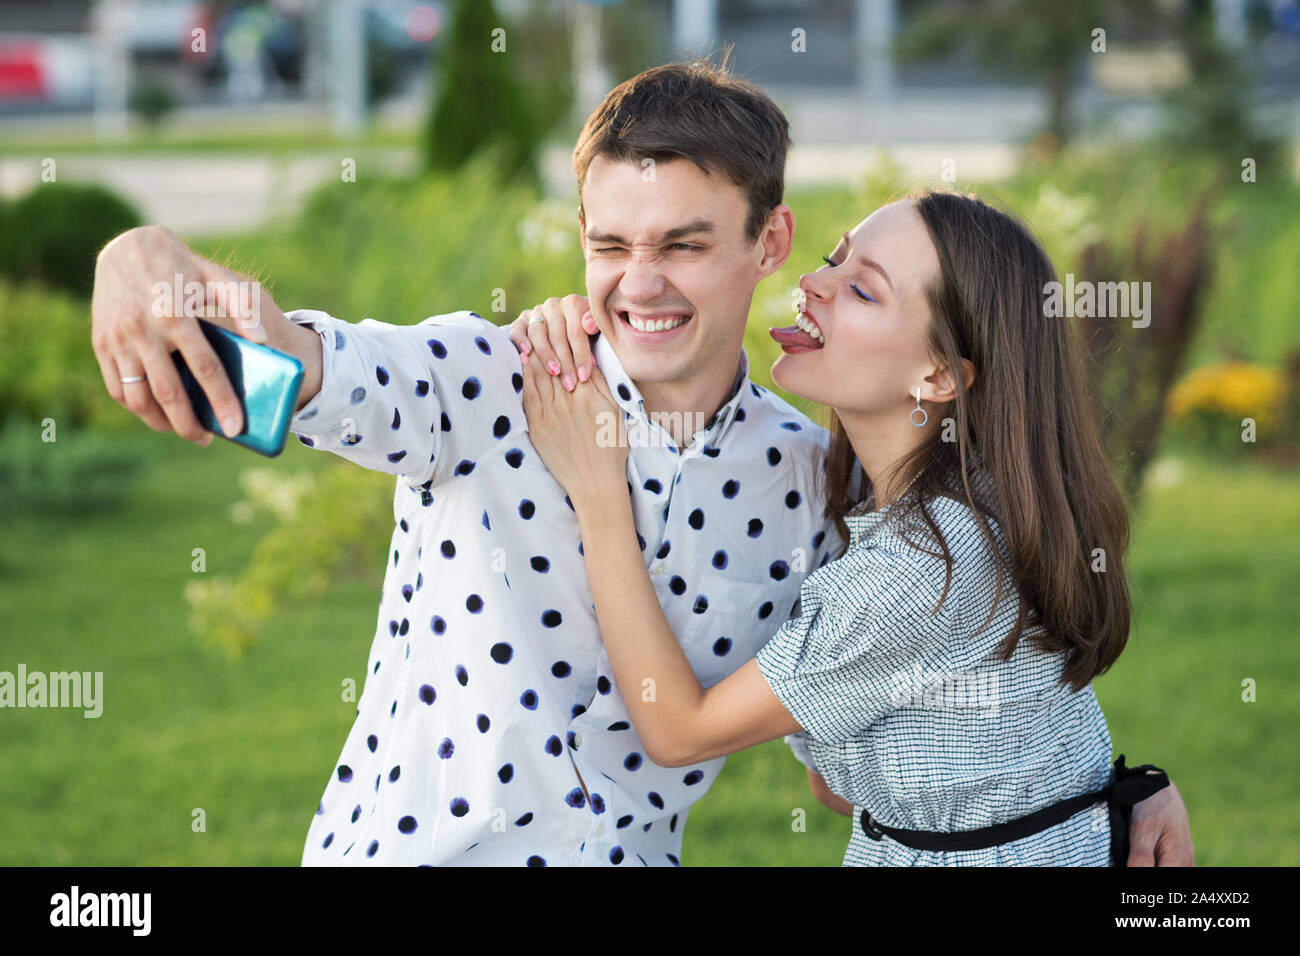 Beautiful couple in love dating outdoors and smiling. Girl persuades her boyfriend to take a picture of herself together. Selfie. Keep a moment in min Stock Photo